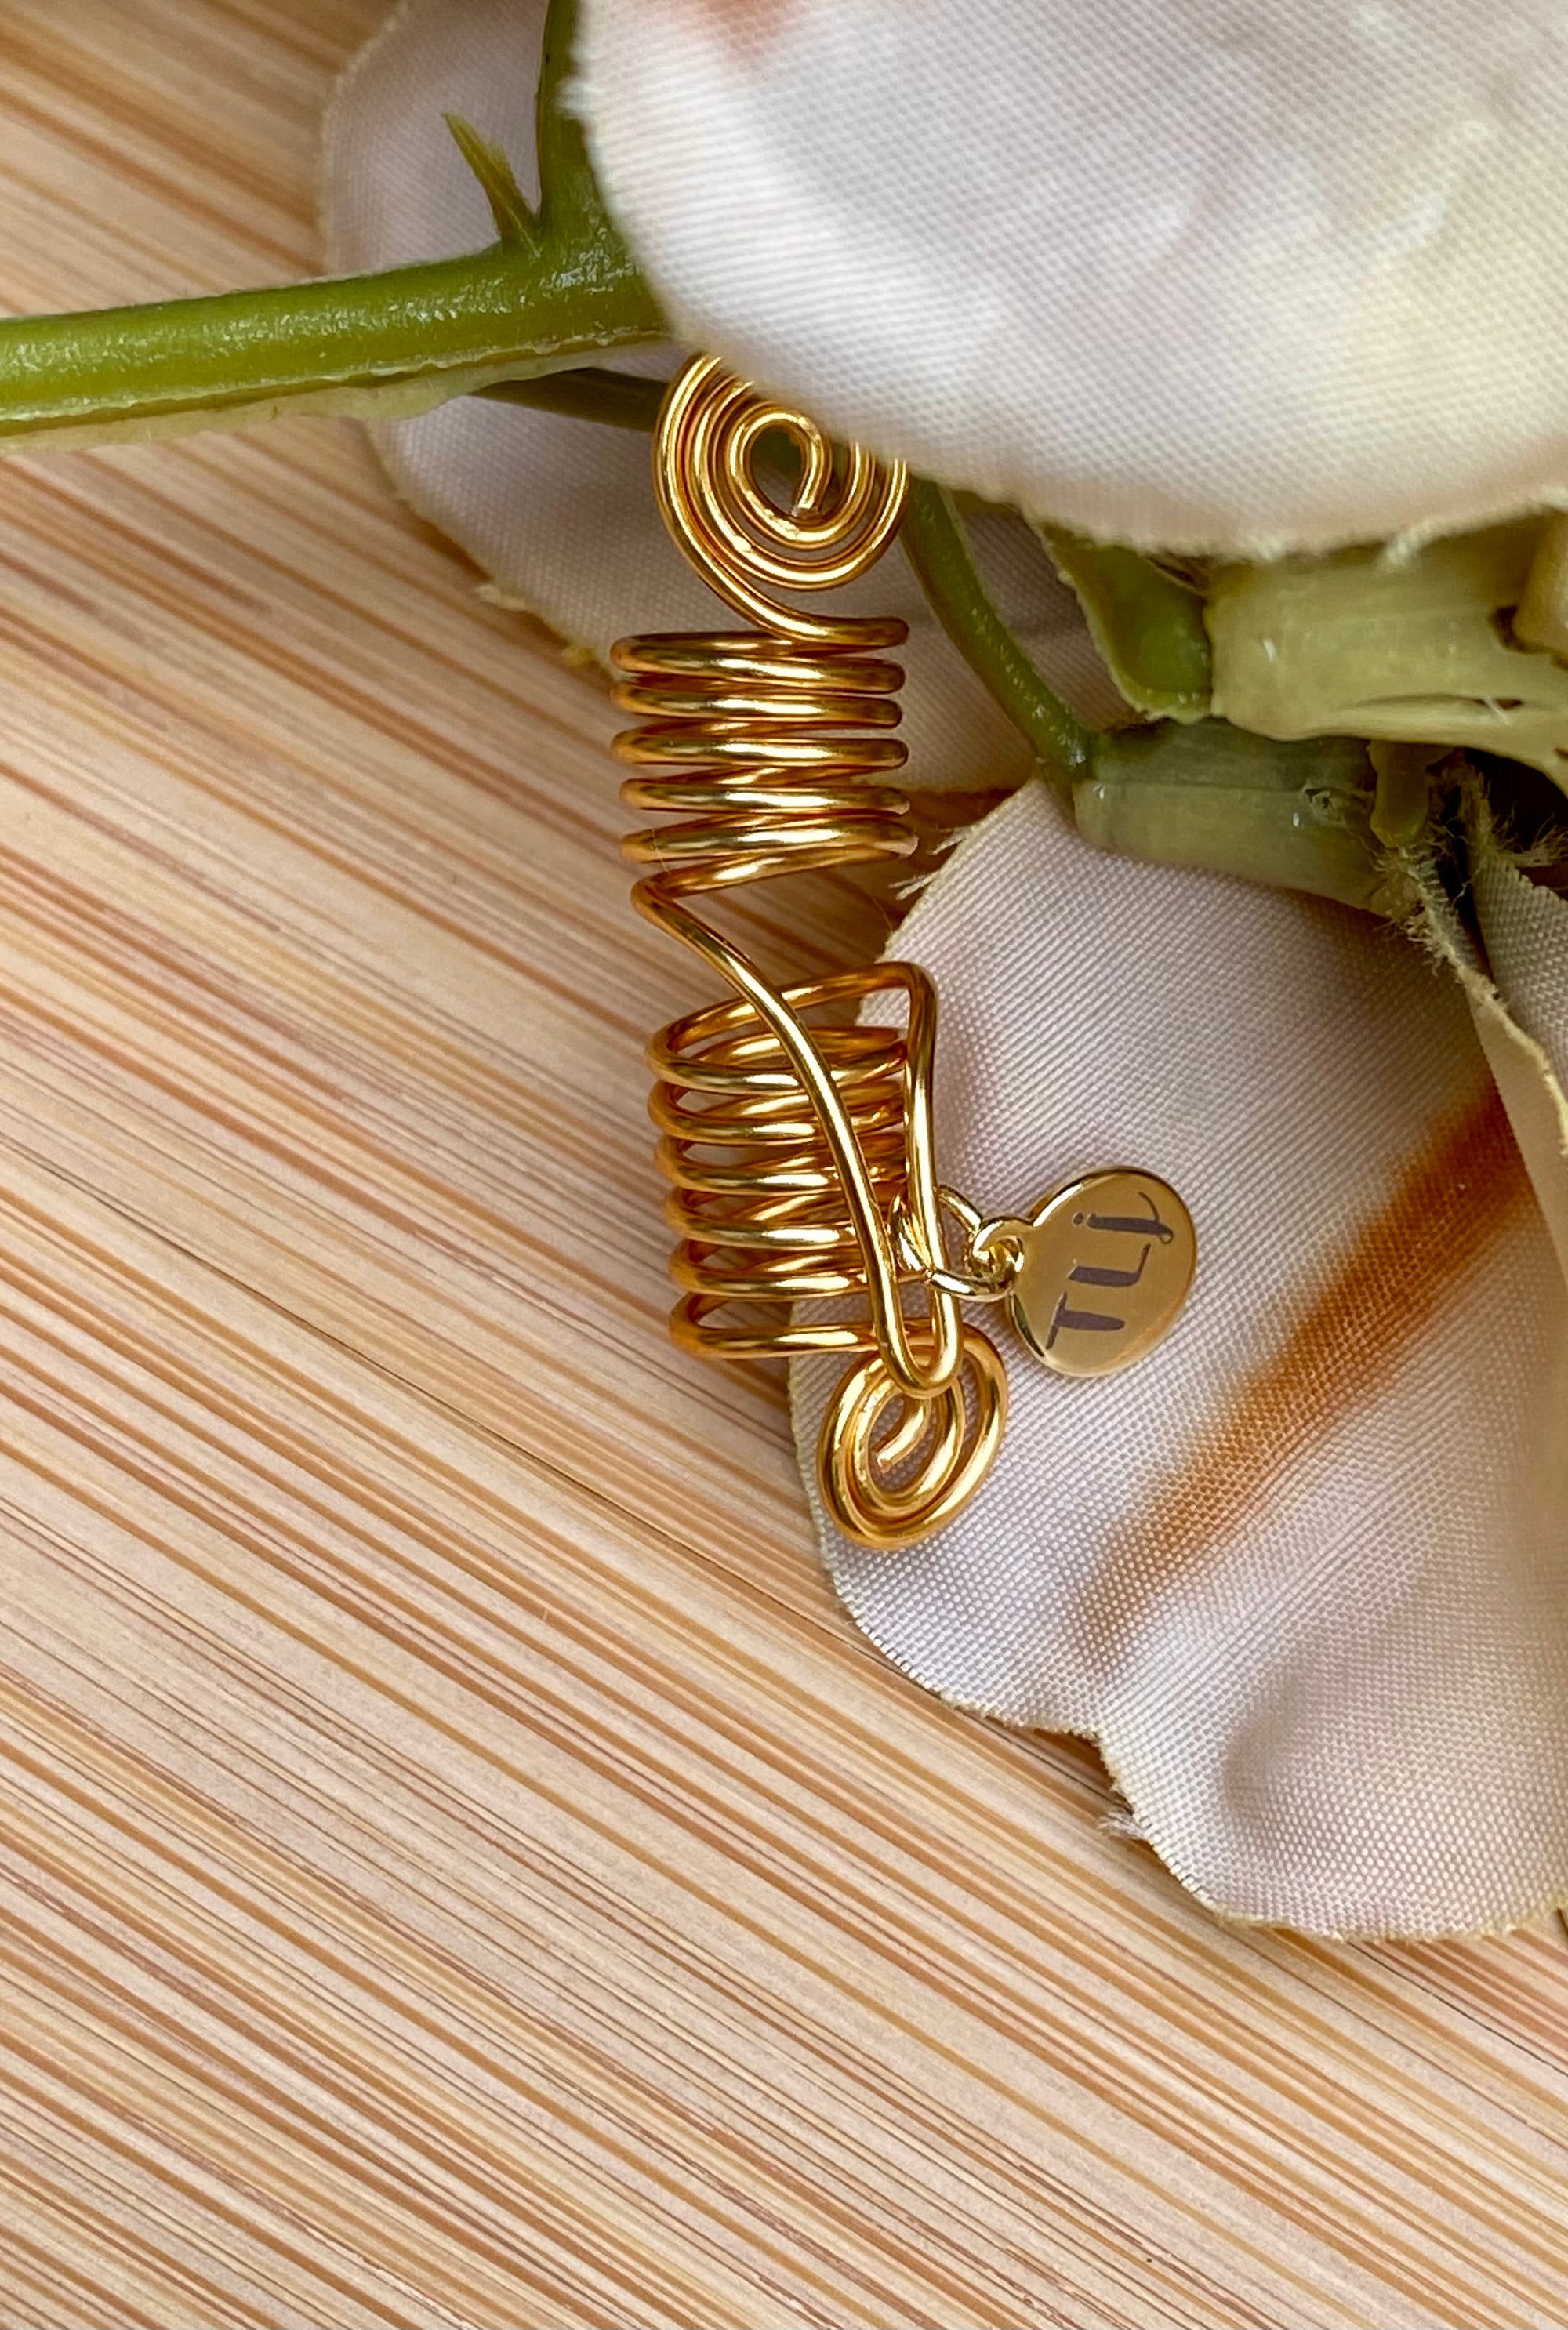 BATTLE LINES Artistic Gold V-Shaped Wire-Wrap Loc Jewel